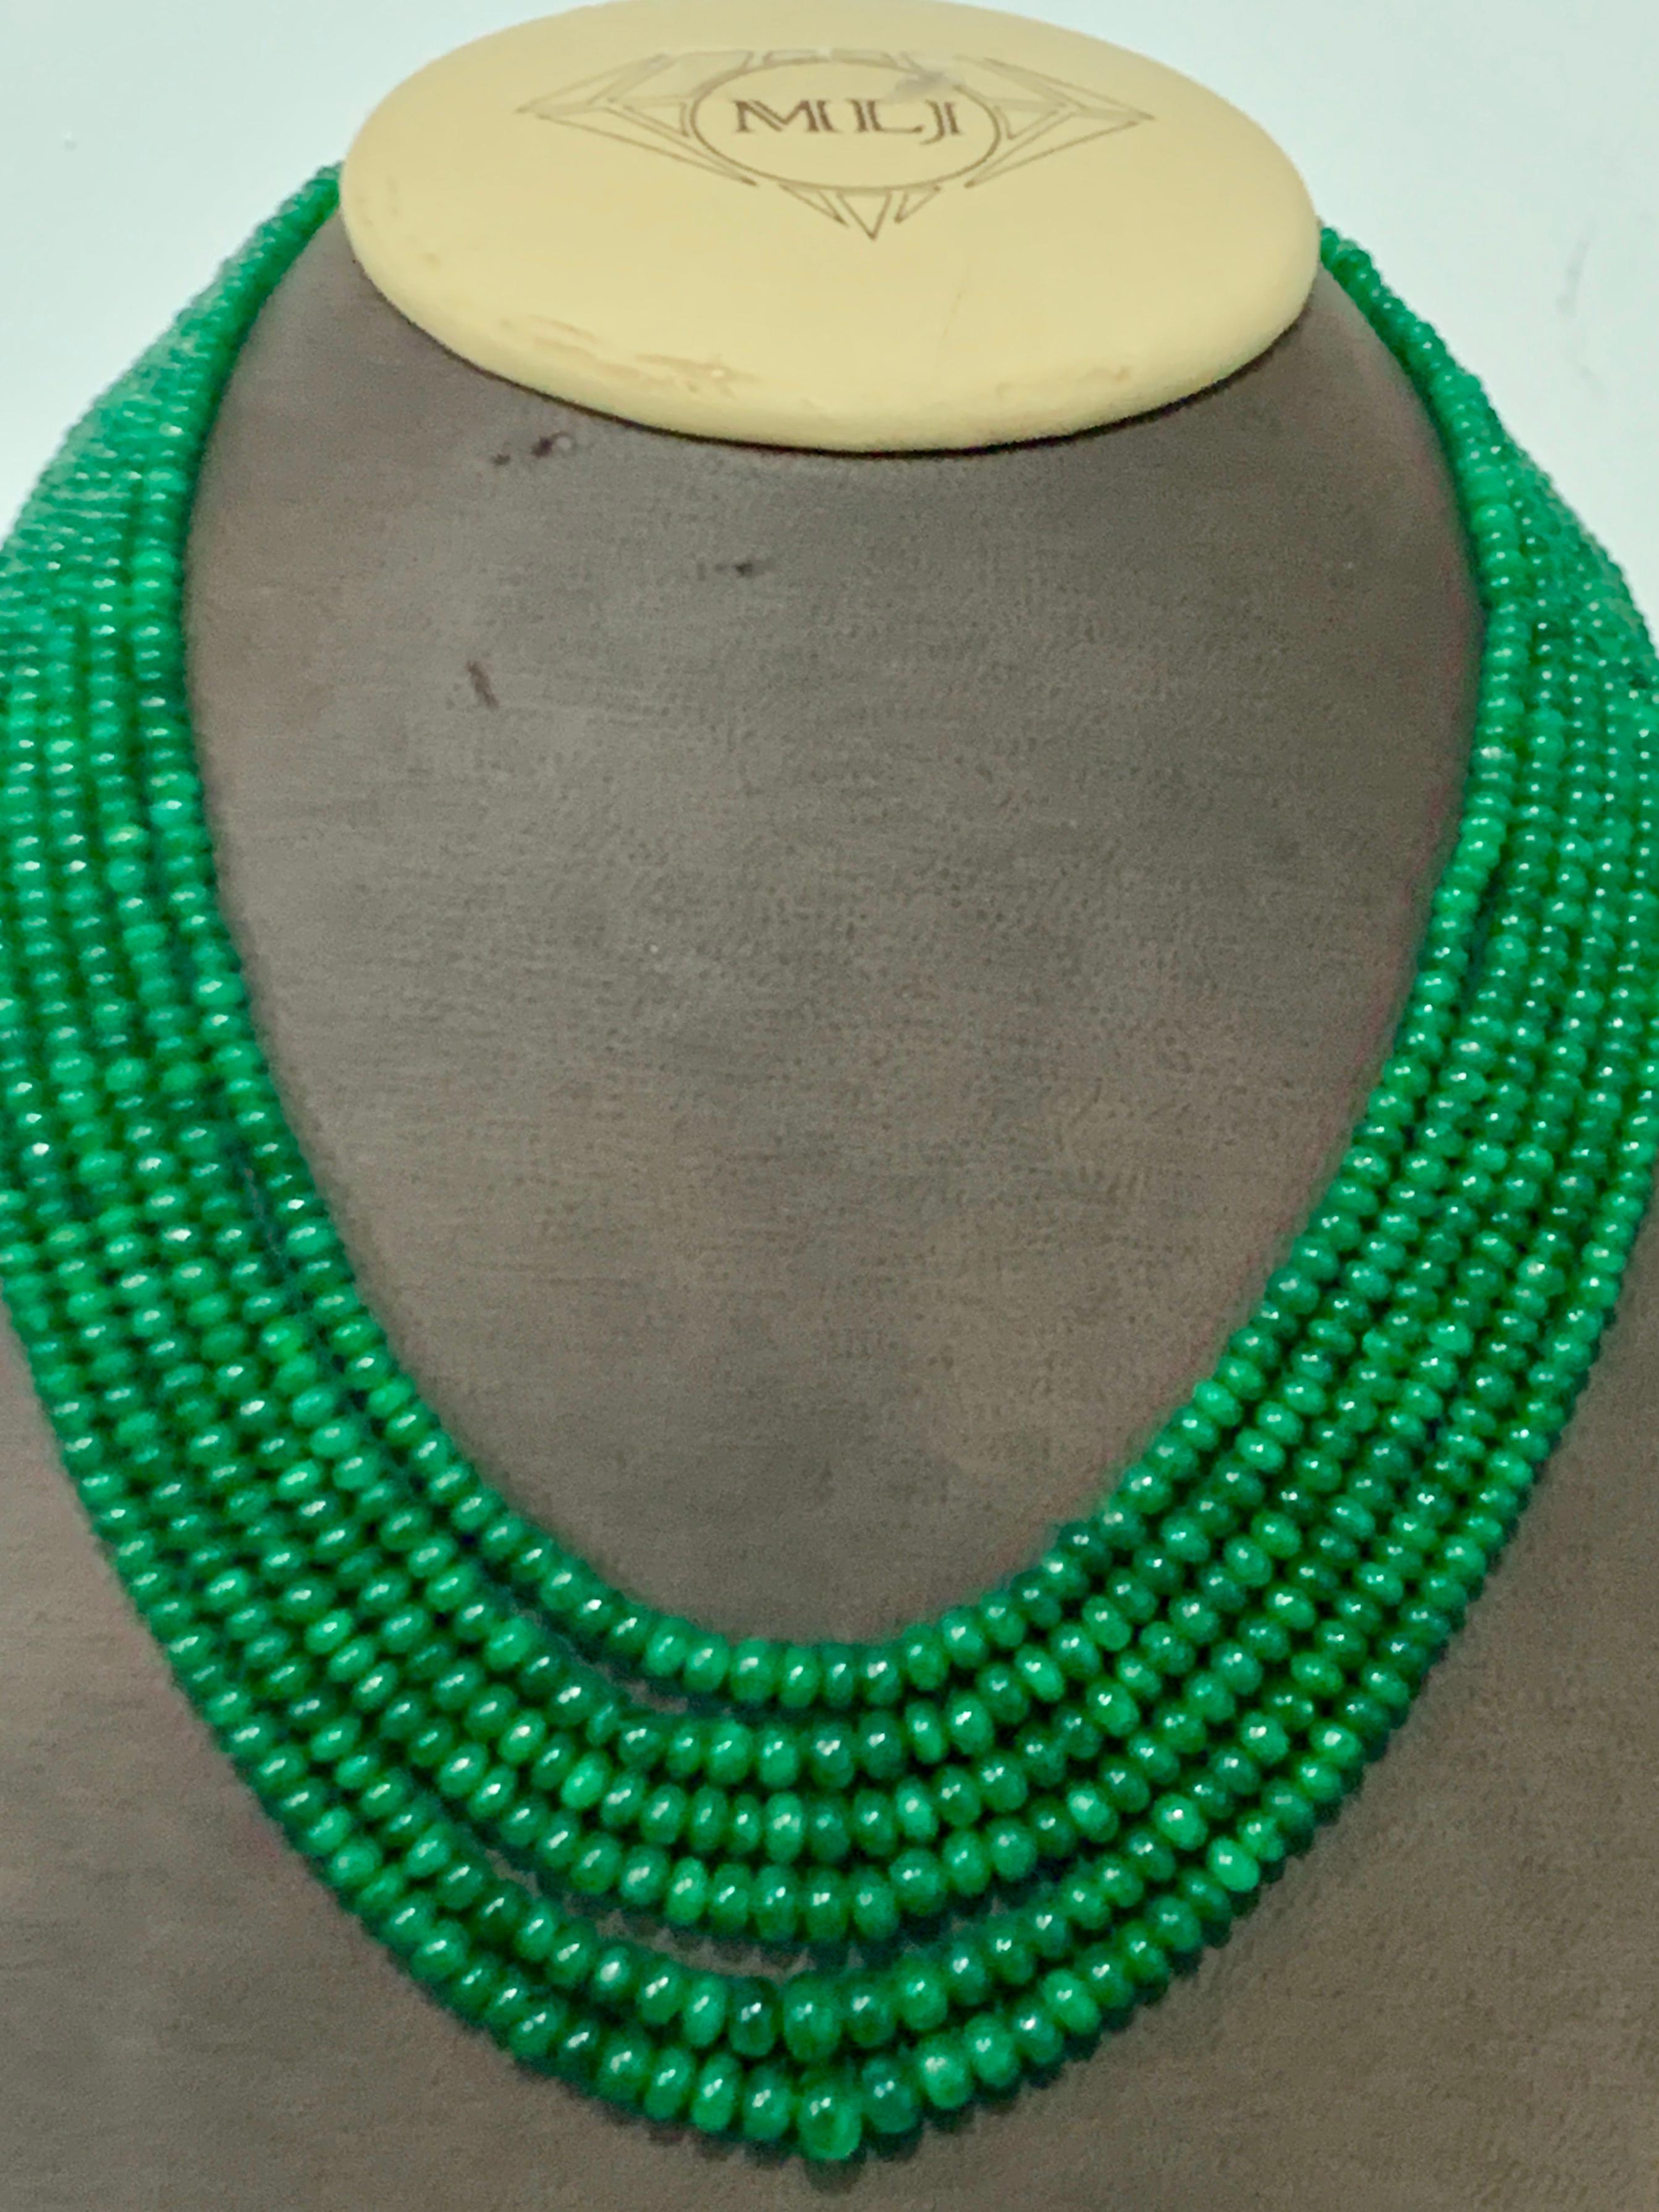 335  Carats 6 Layer  natural Brazilian Emerald Bead Necklace Sterling Silver Clasp
This spectacular Necklace   consisting of approximately 335 Ct   of  Fine Emerald Beads  .
A magnificent emerald bead necklace featuring a large number of Graduating